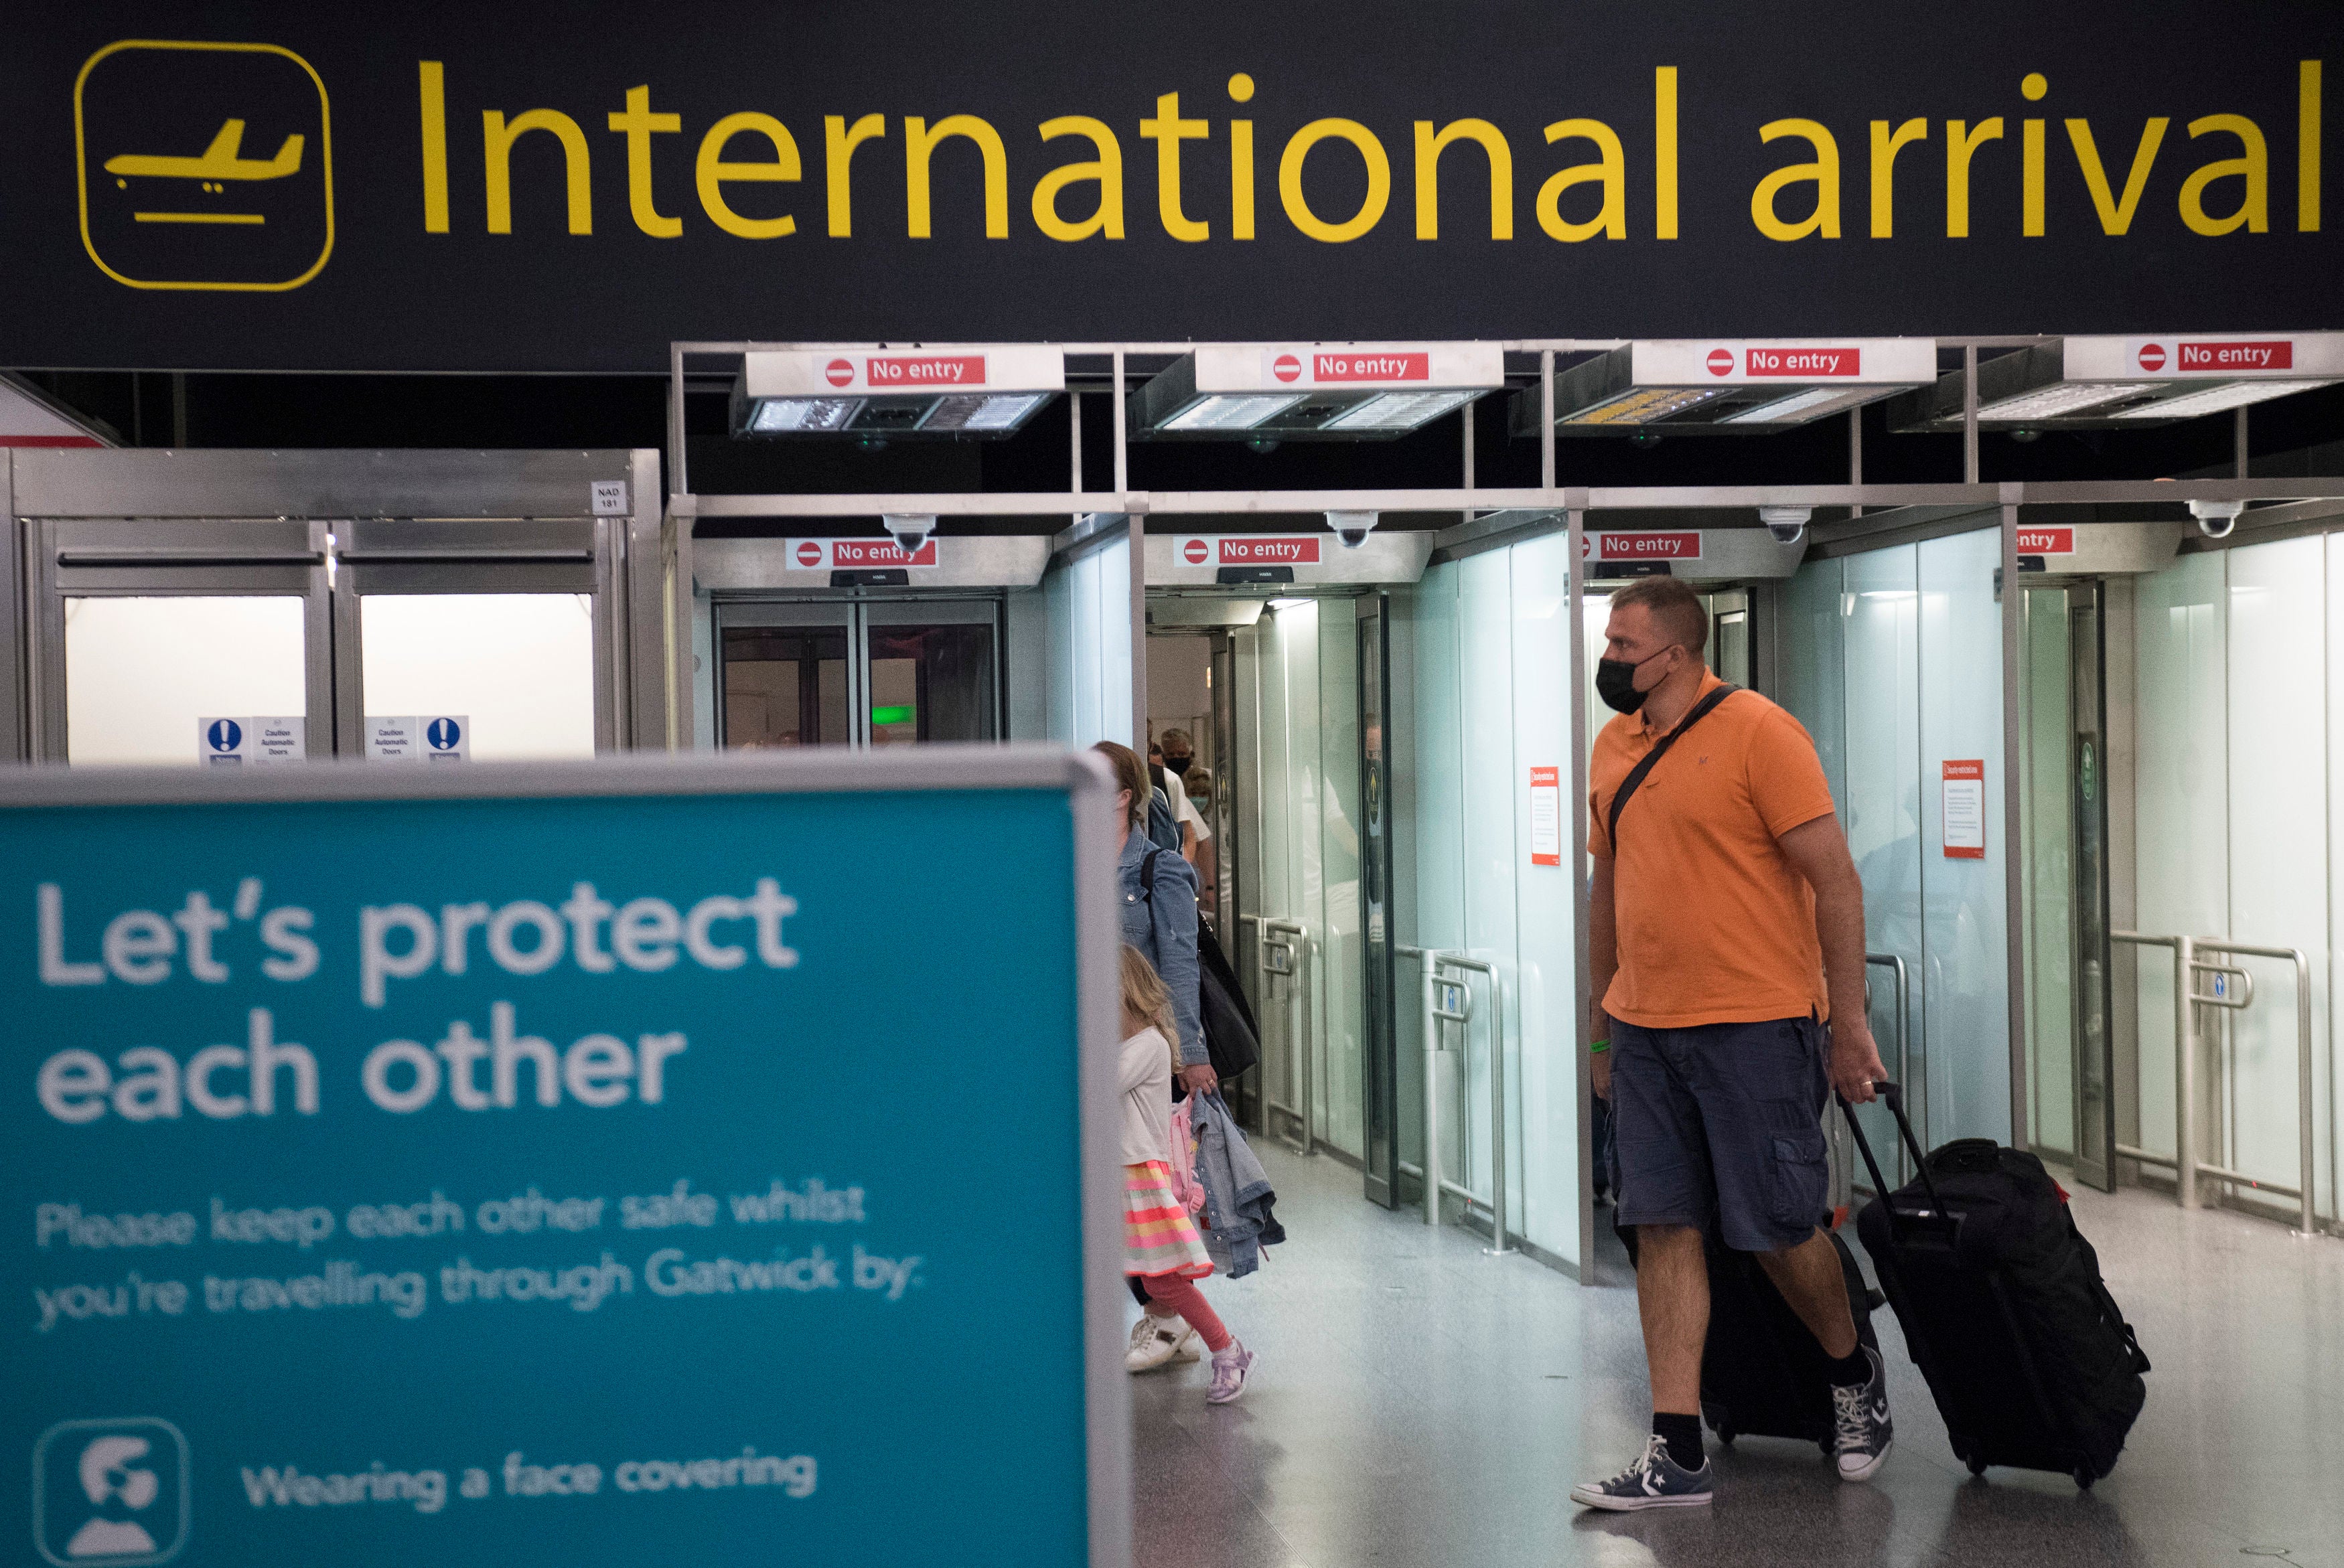 Gatwick Airport has many flights to amber list destinations